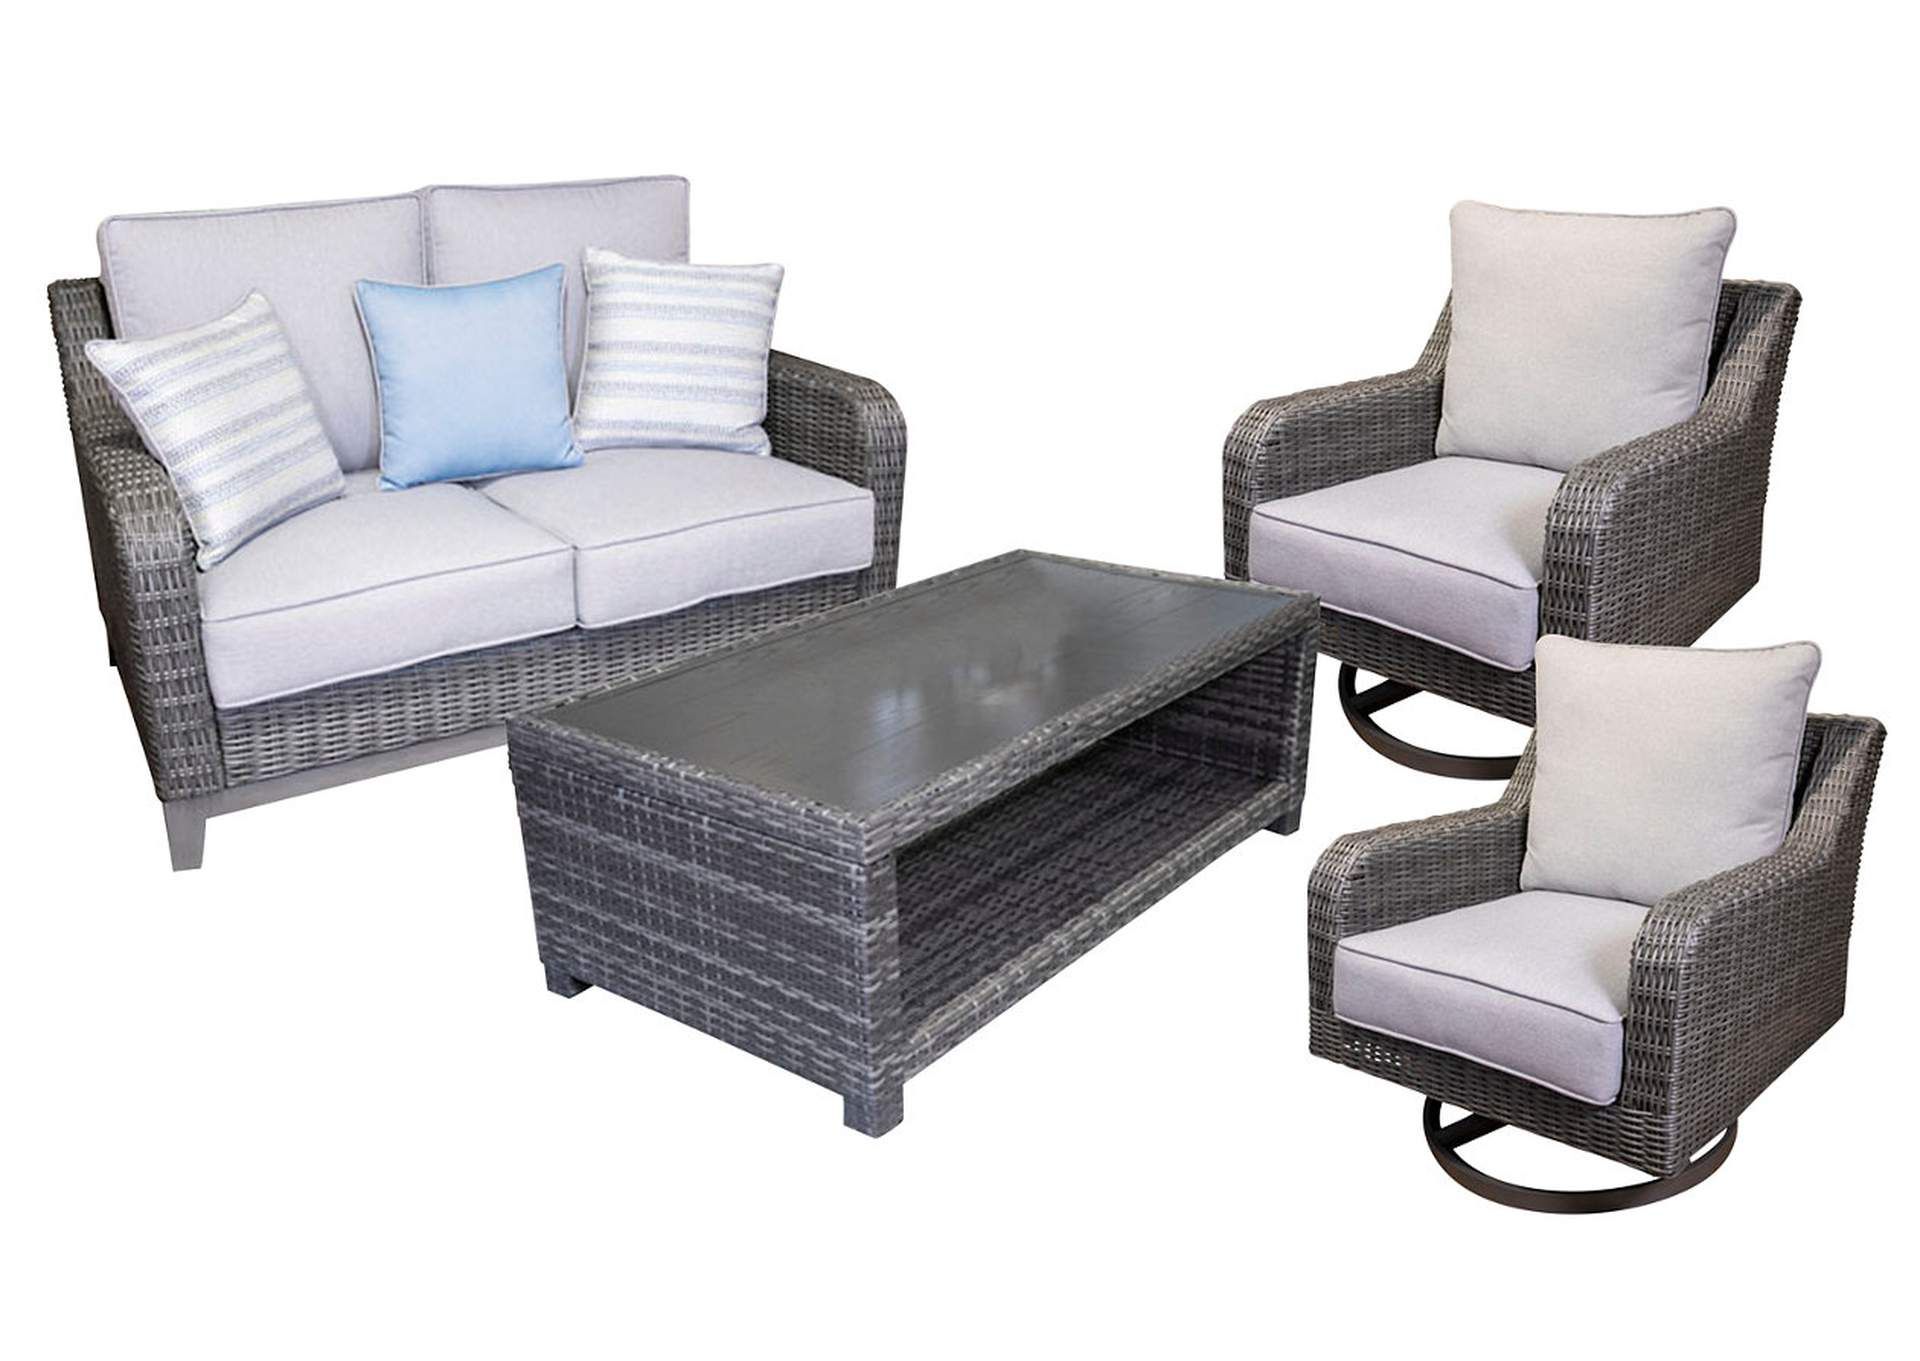 Elite Park Outdoor Loveseat And 2 Lounge Chairs With Coffee Table Ivan  Smith Furniture Regarding Outdoor 2 Arm Chairs And Coffee Table (View 7 of 15)